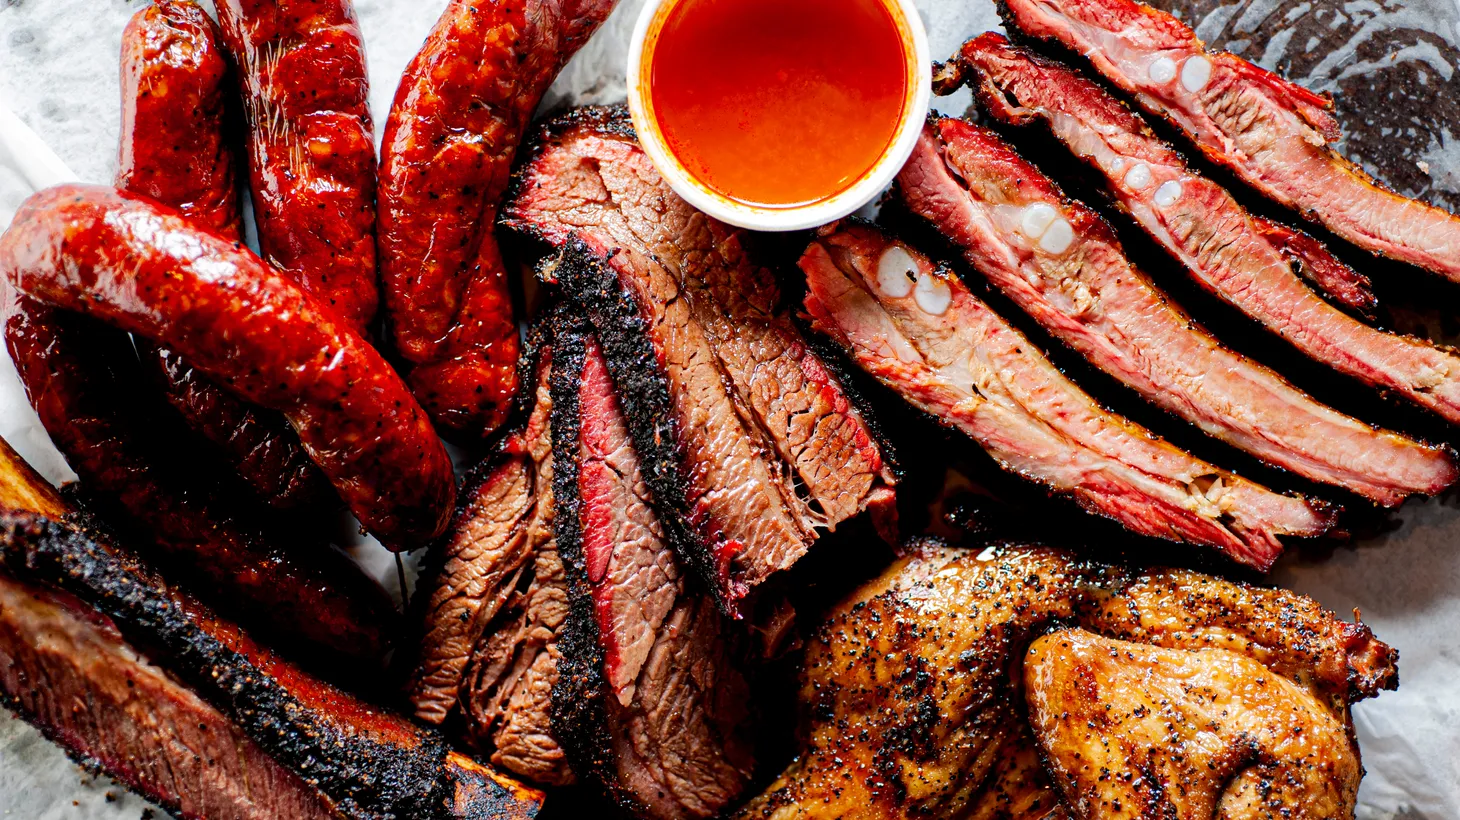 In Texas, barbecue is usually sold by weight and customers expect a full tray of smoked meat. With inflation and other factors, barbecue joints are struggling to stay afloat.